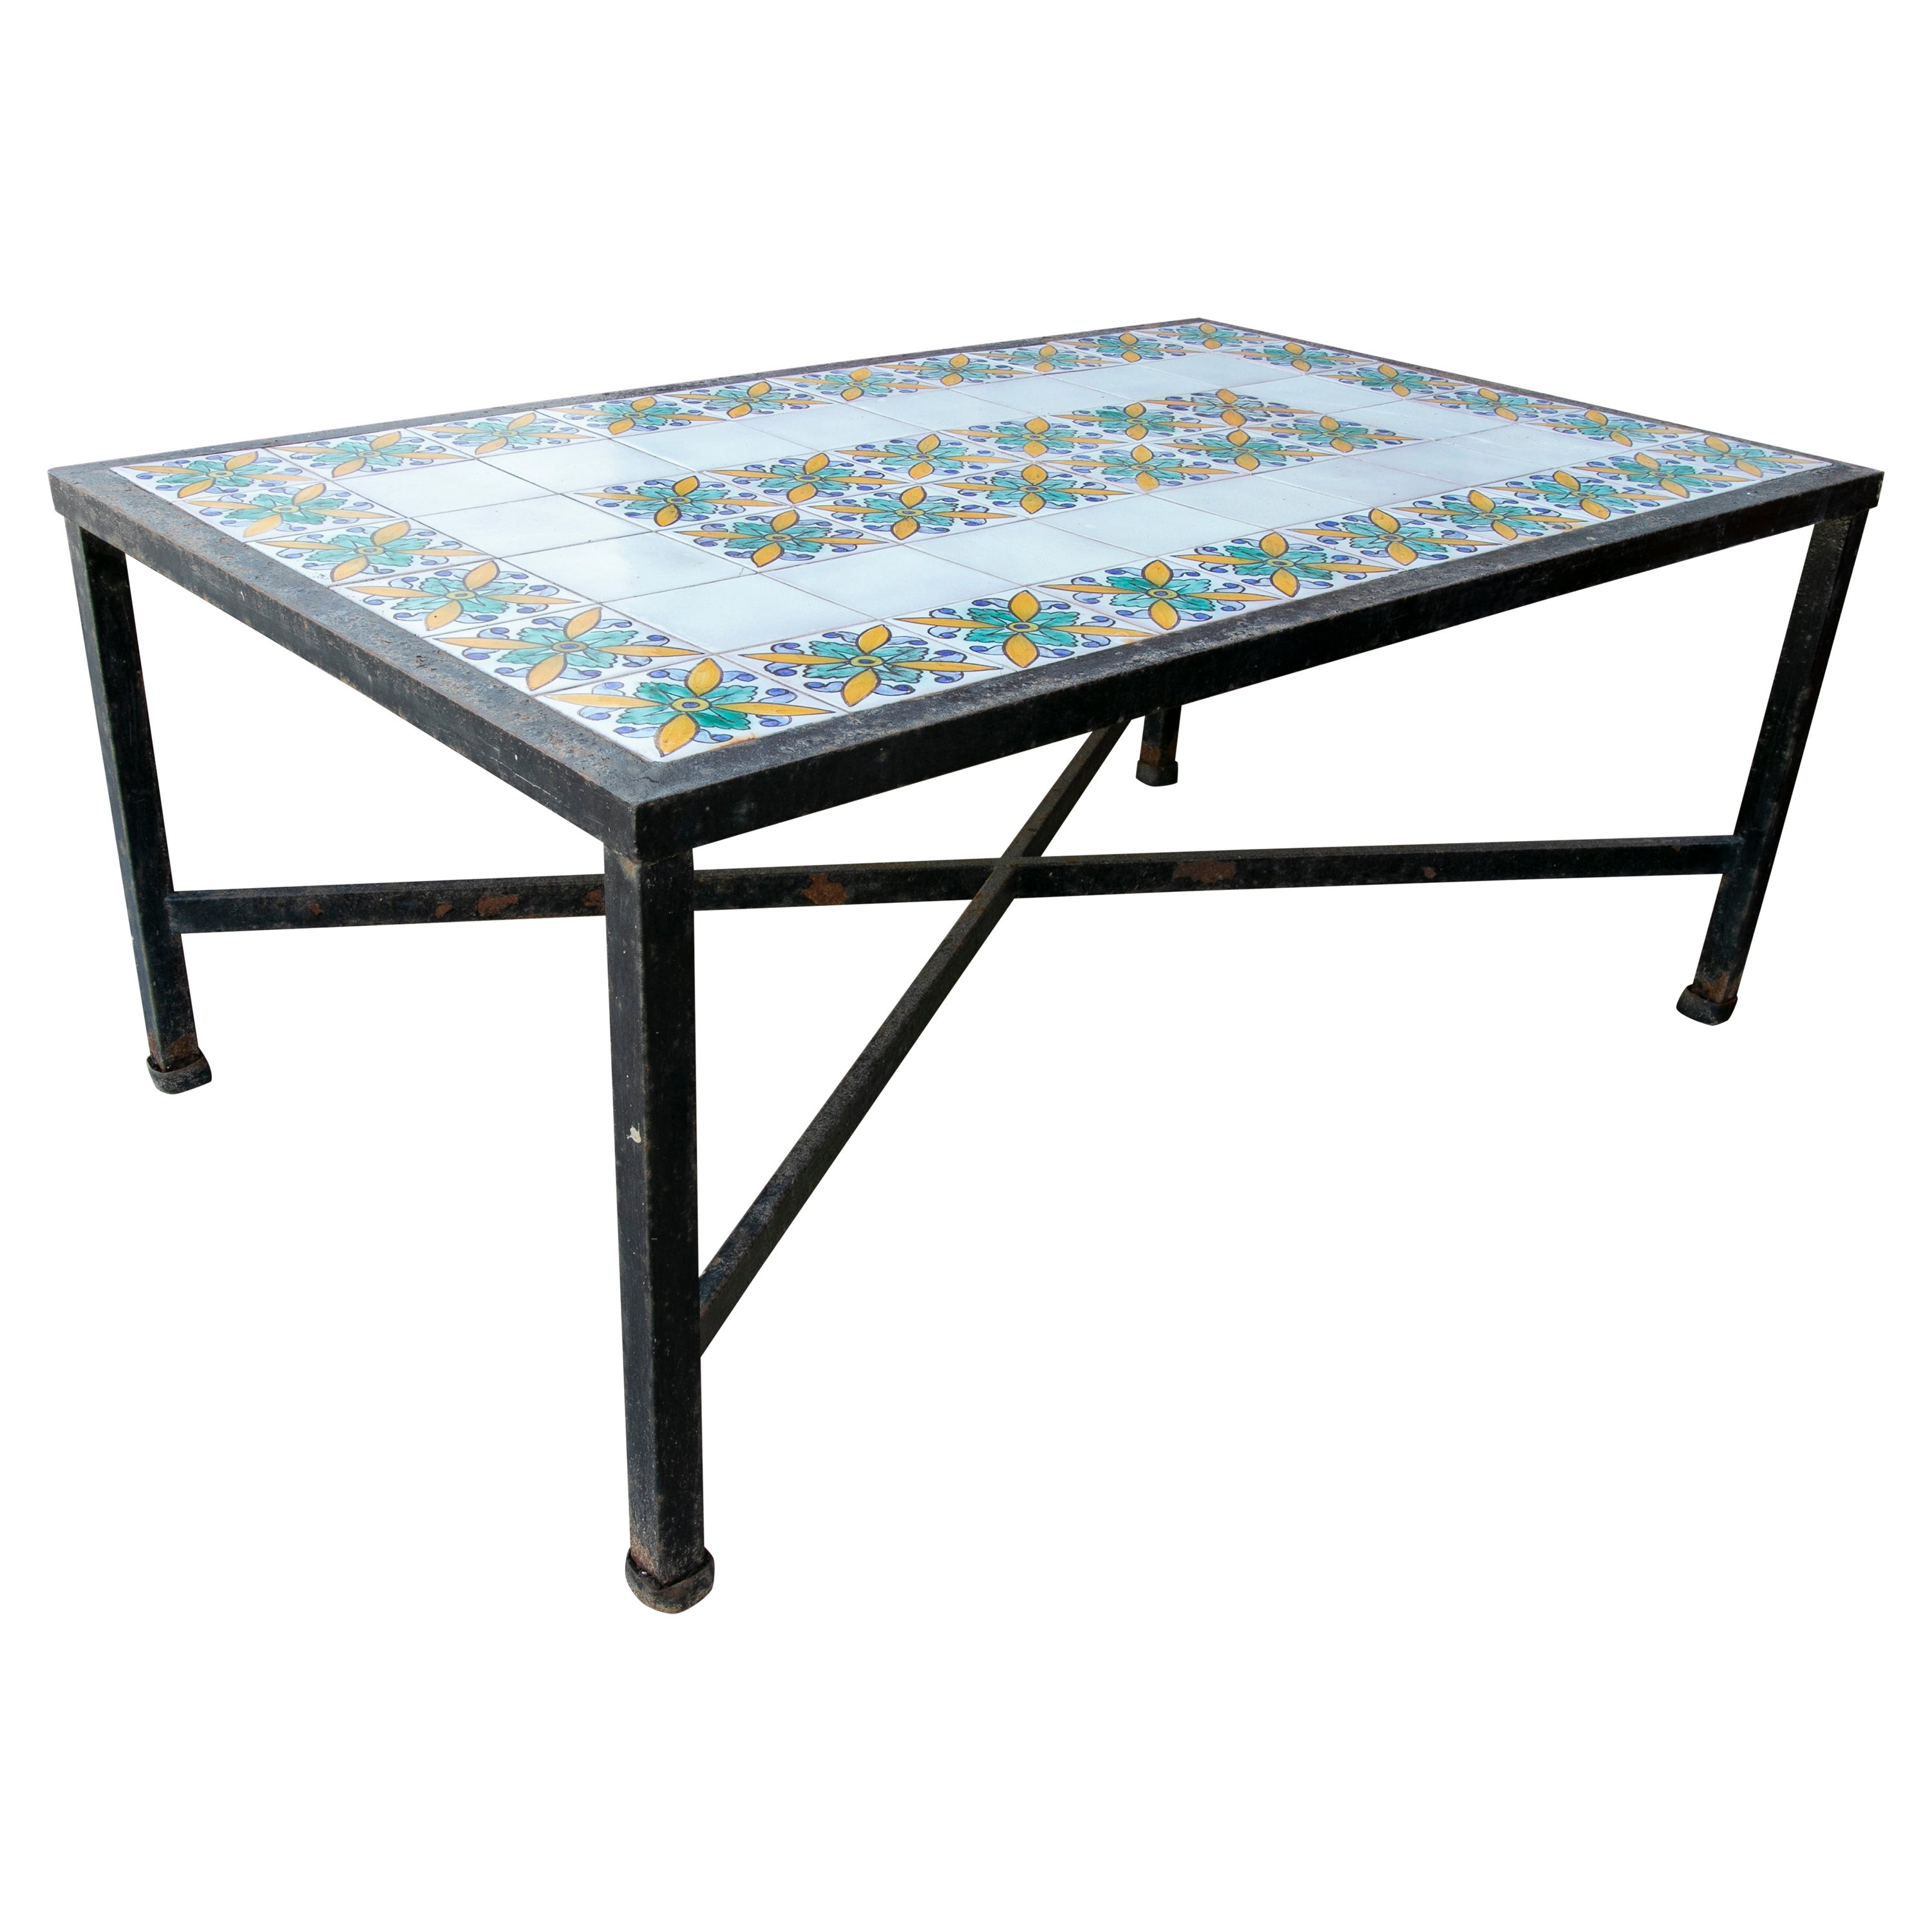 1980s Table with Iron Base and Geometrical Tiles on Top